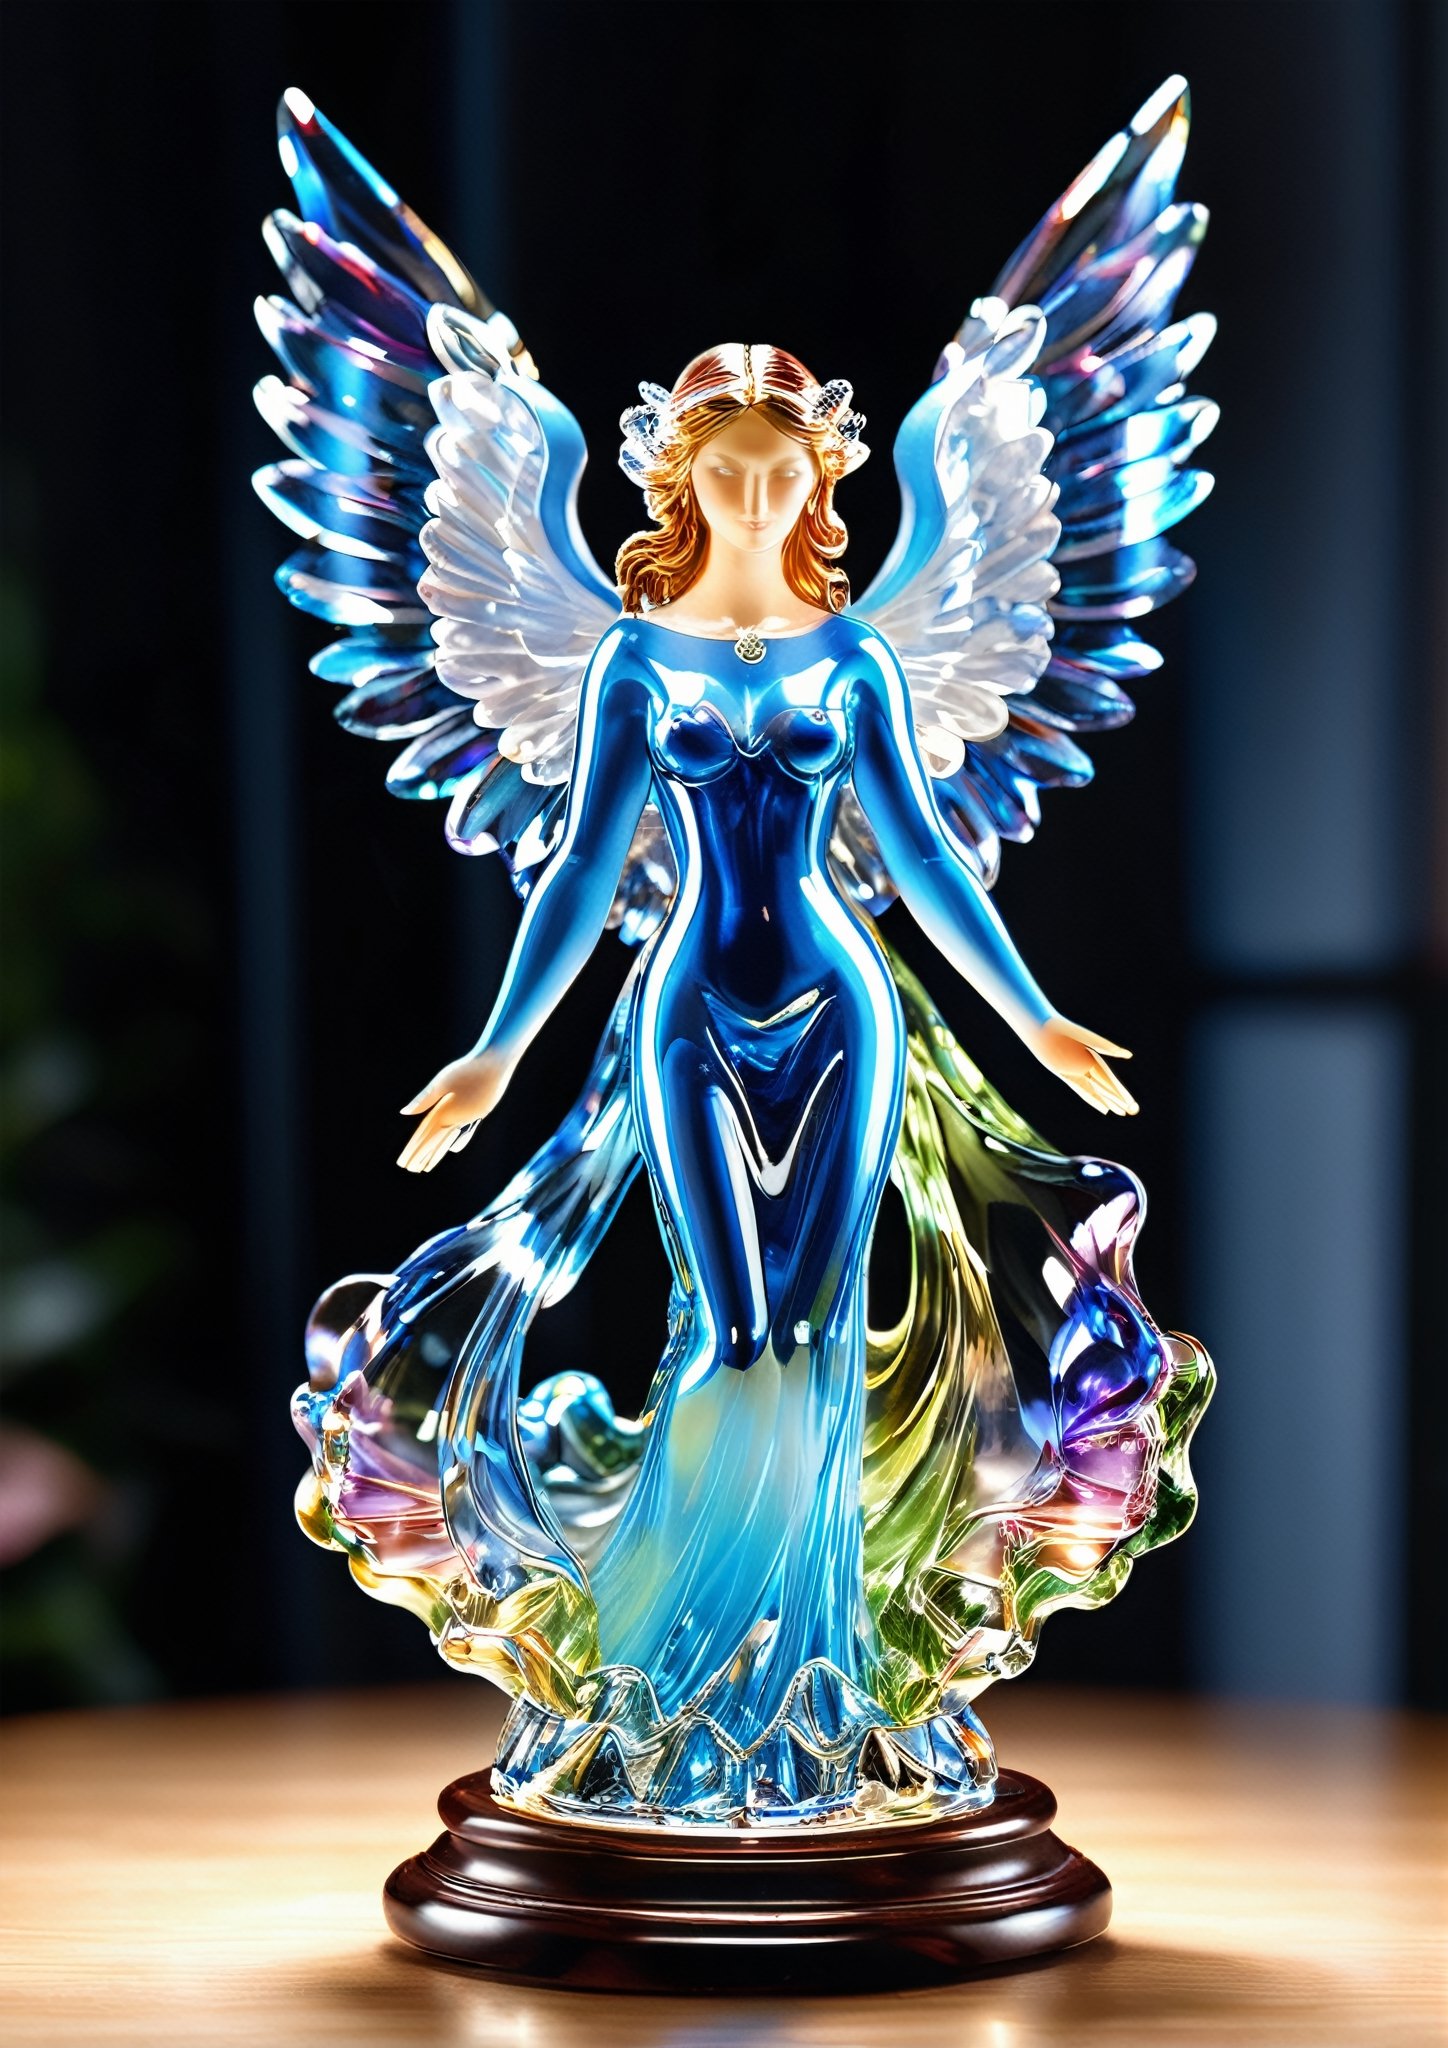 stunningly pretty angel made of 100% of blown and shaped glass. the glass has colors mixed into it in order to bring our the realistic glass sculpture artisans artist craftsmanship of the glass angel figure. the attention to detail of the glass angel is mind blowing.

her wings are spread. there is a hint of opalescence deep inside the glass figurine. 

it is on a impressive display shelf made of stunning Asian Satinwood texture. it is deeply dark in the room. the only light is the light that is shinning from the wooden base the glass angel is placed upon, the light is shining from the wooden base up through the glass angel. the light emulating from the glass angel is casting dramatic and interesting patterns of light and shadows on everything around it. 
